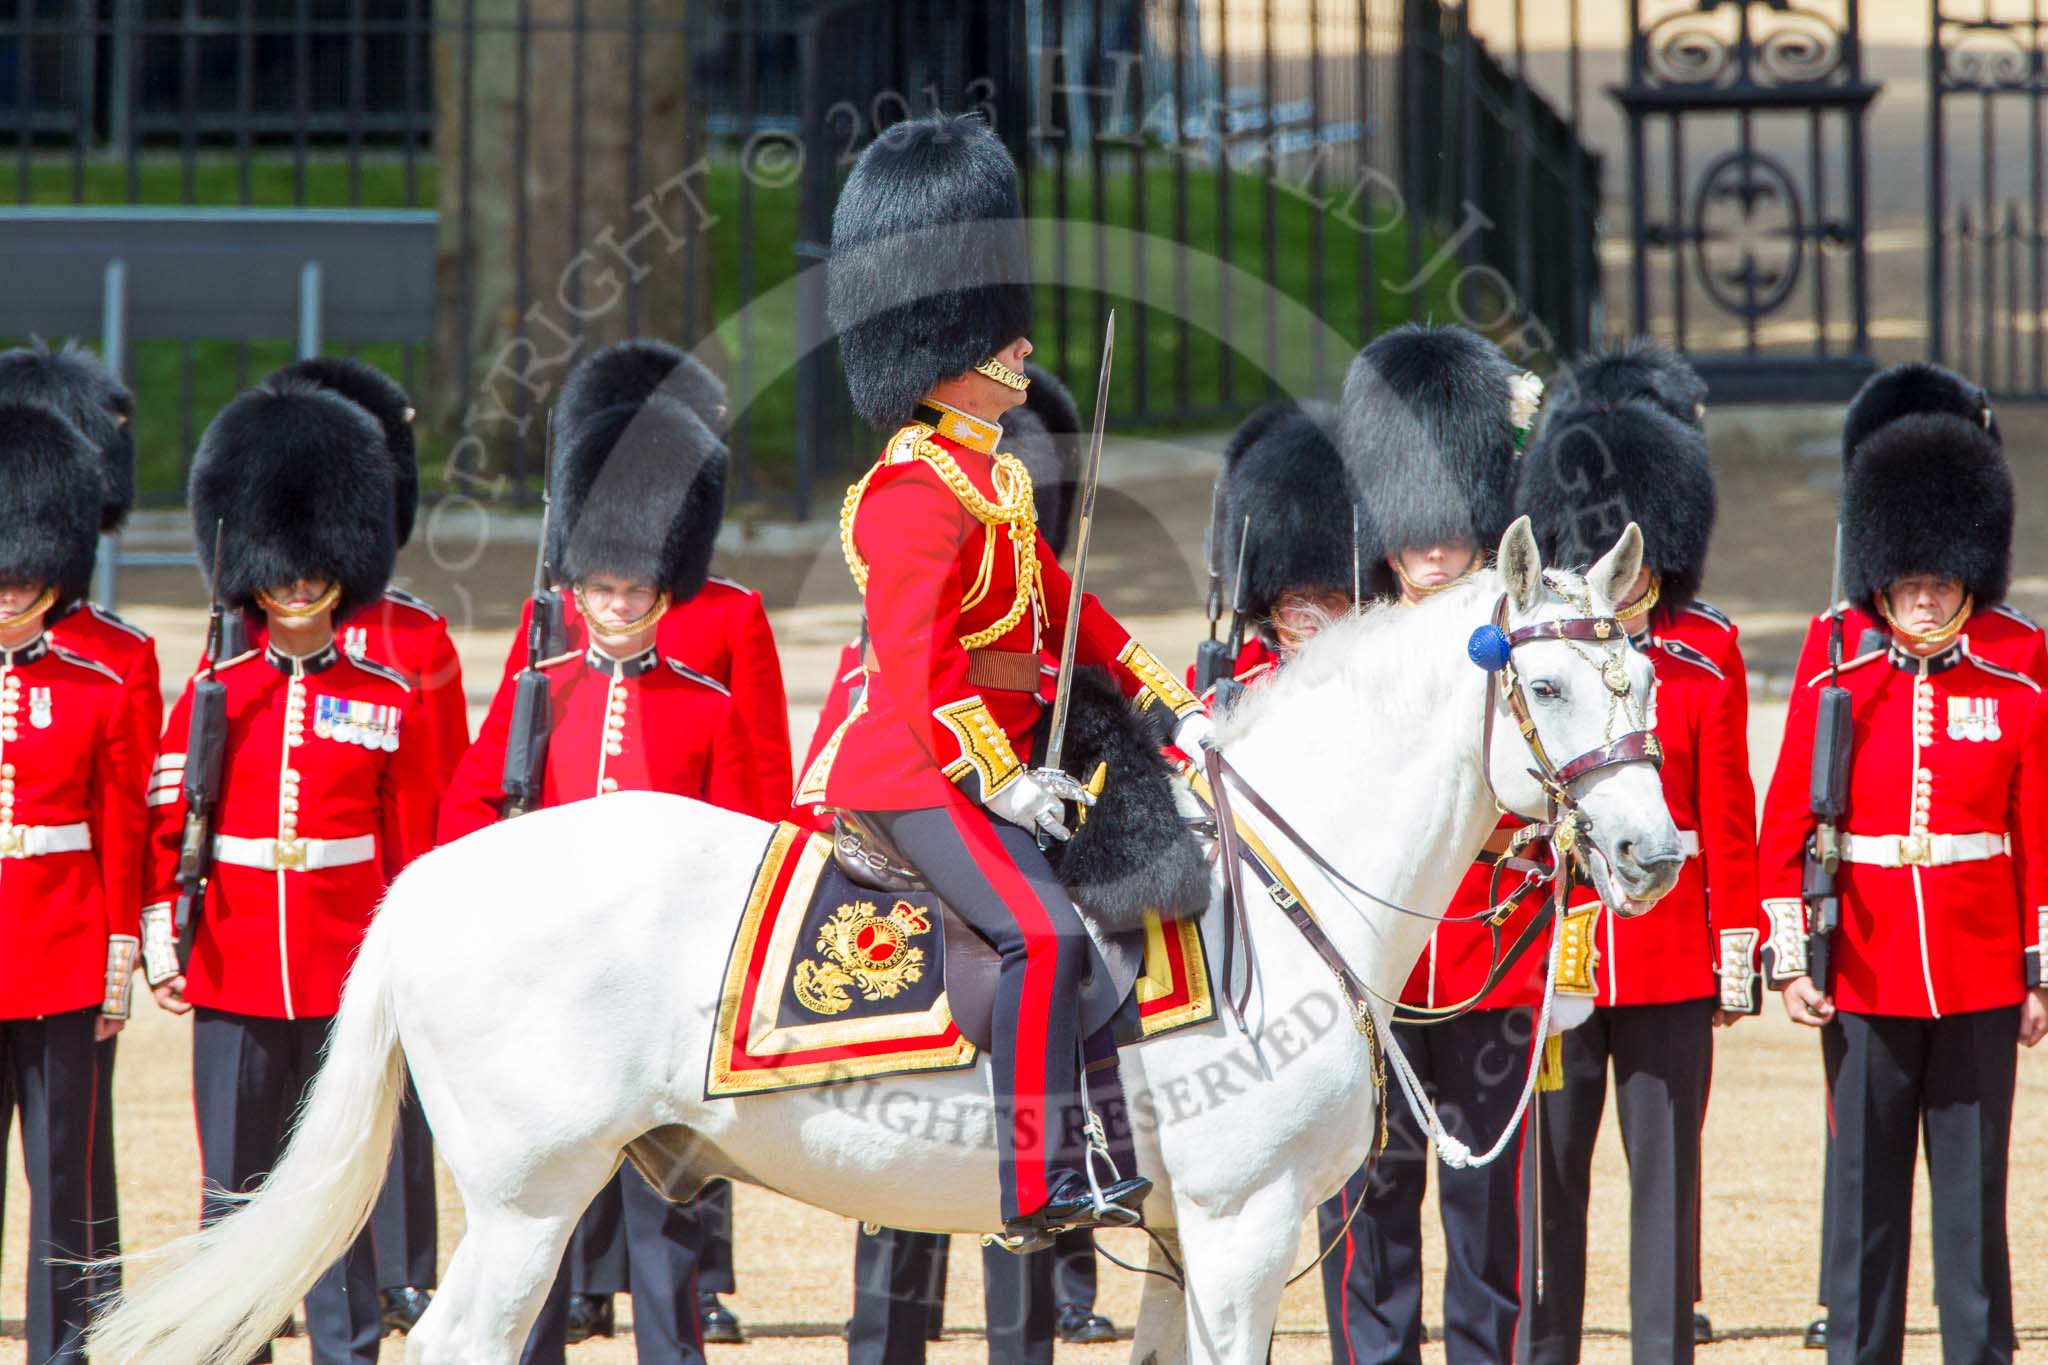 Trooping the Colour 2013: The Field Officer in Brigade Waiting, Lieutenant Colonel Dino Bossi, Welsh Guards, has moved to the side of the line to give way for the members of the royal family due to arrive. Image #173, 15 June 2013 10:44 Horse Guards Parade, London, UK